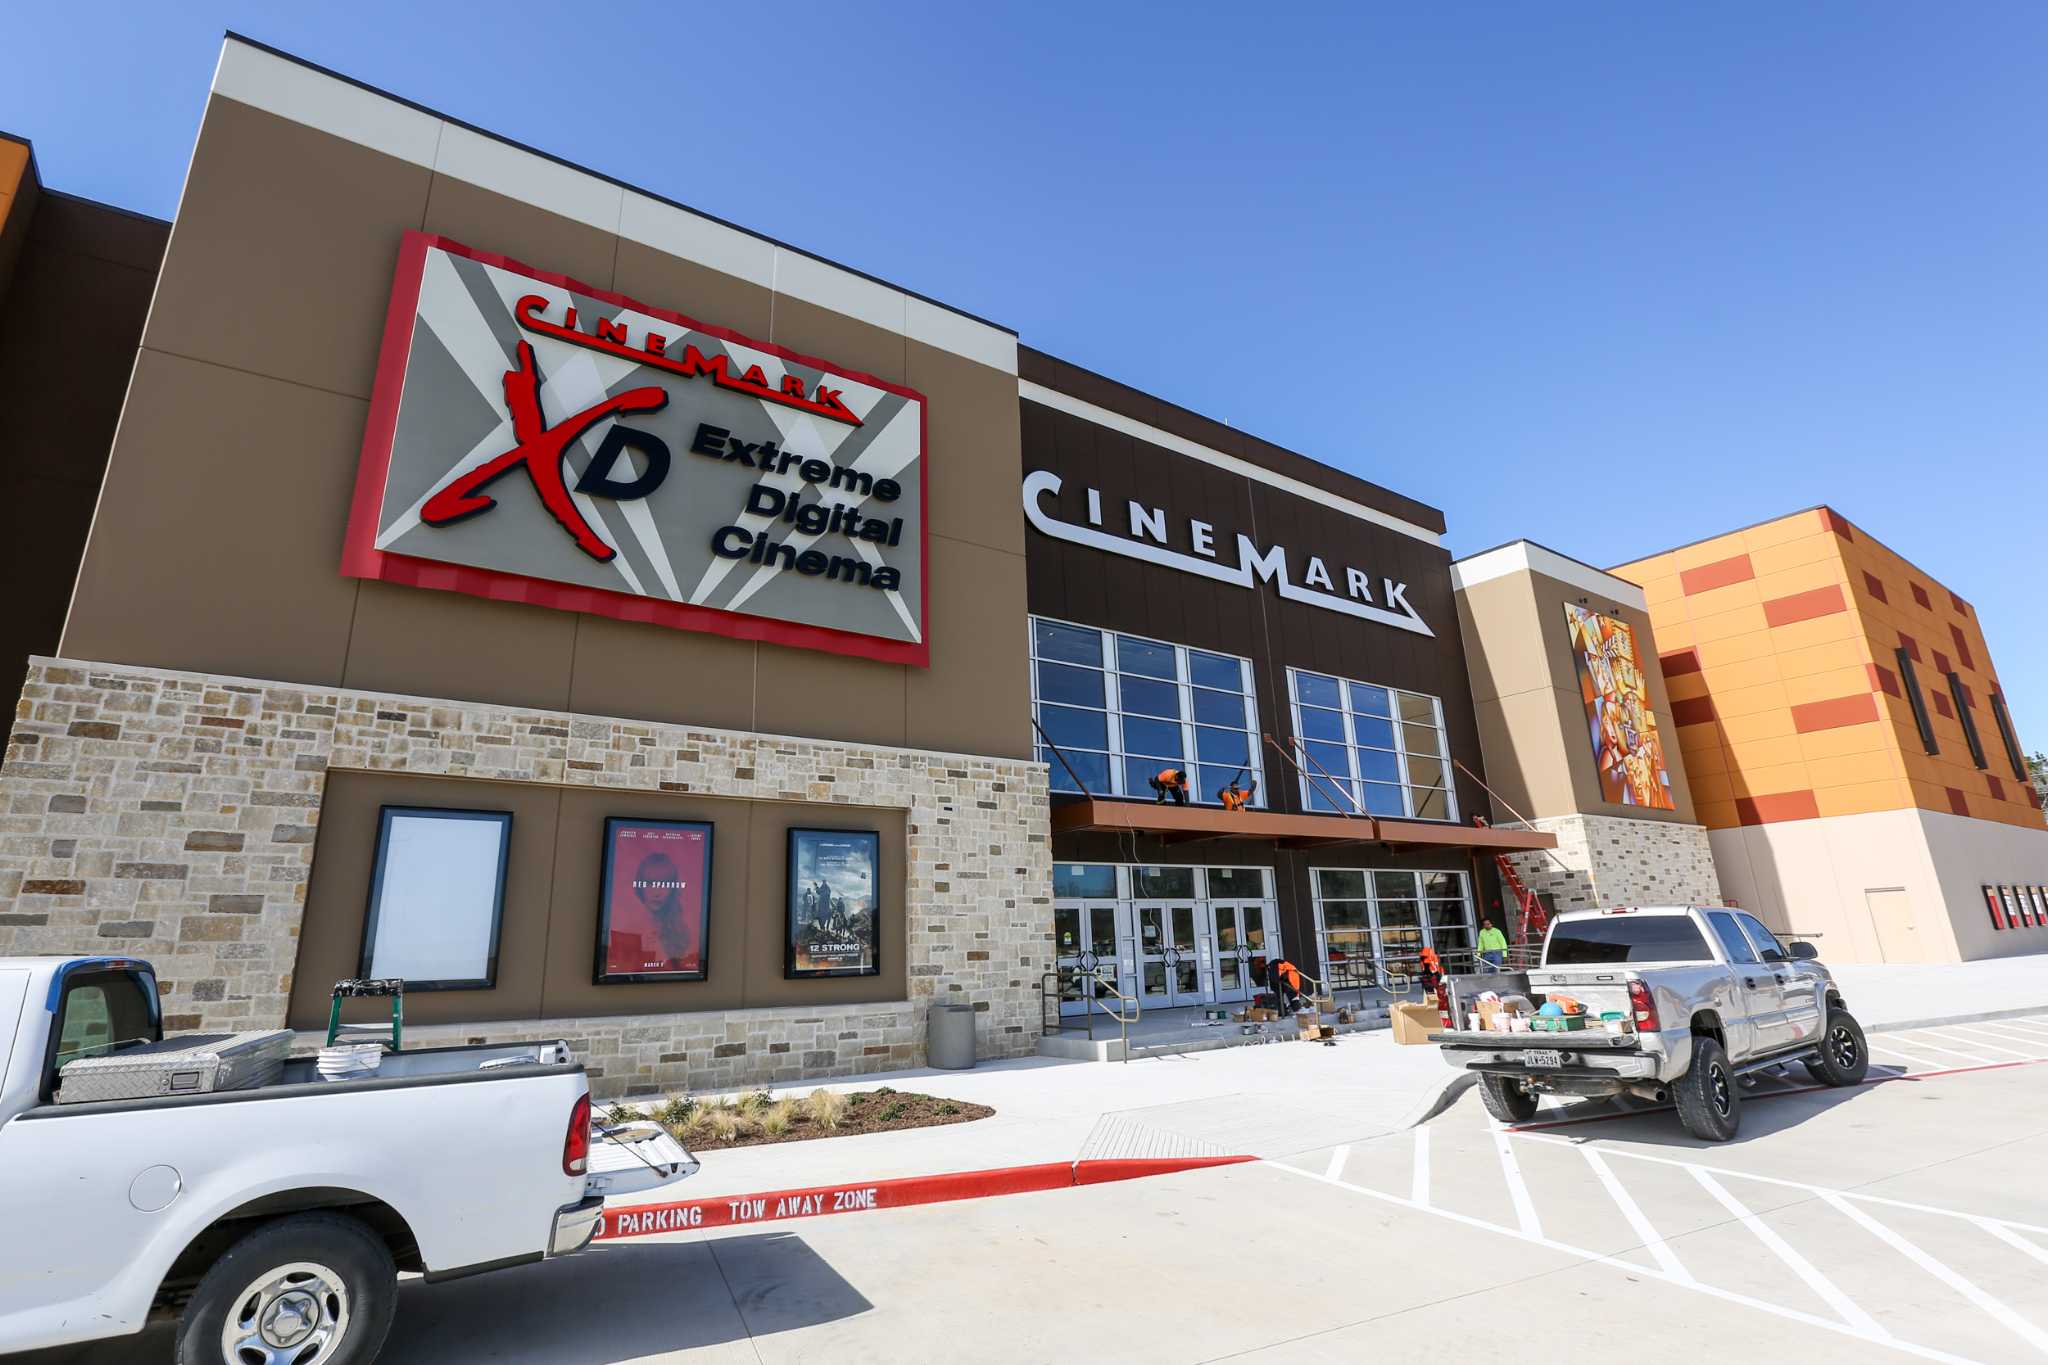 Cinemark to institute ban on large bags in movie theaters for 'safety and security ...2048 x 1365